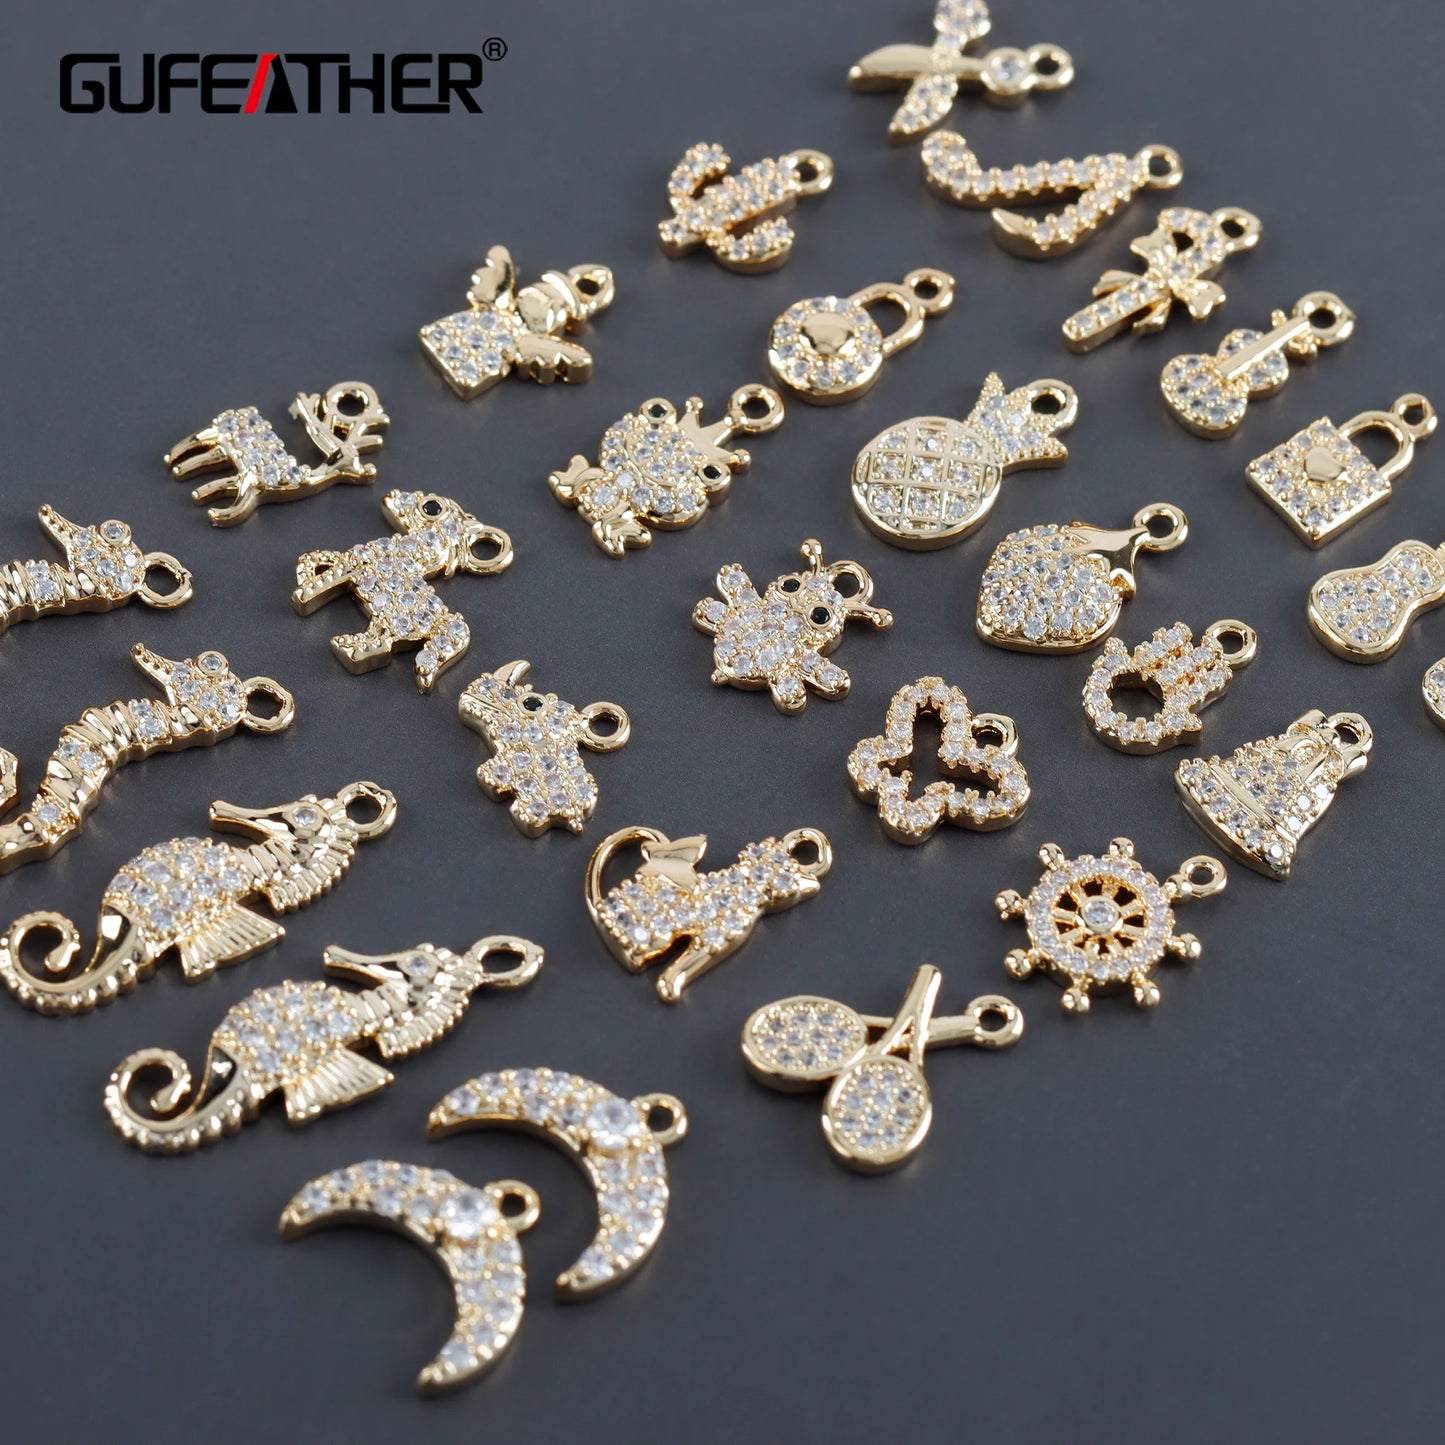 GUFEATHER M1001,jewelry accessories,pass REACH,nickel free,18k gold plated,copper,zircons,diy pendants,jewelry making,10pcs/lot